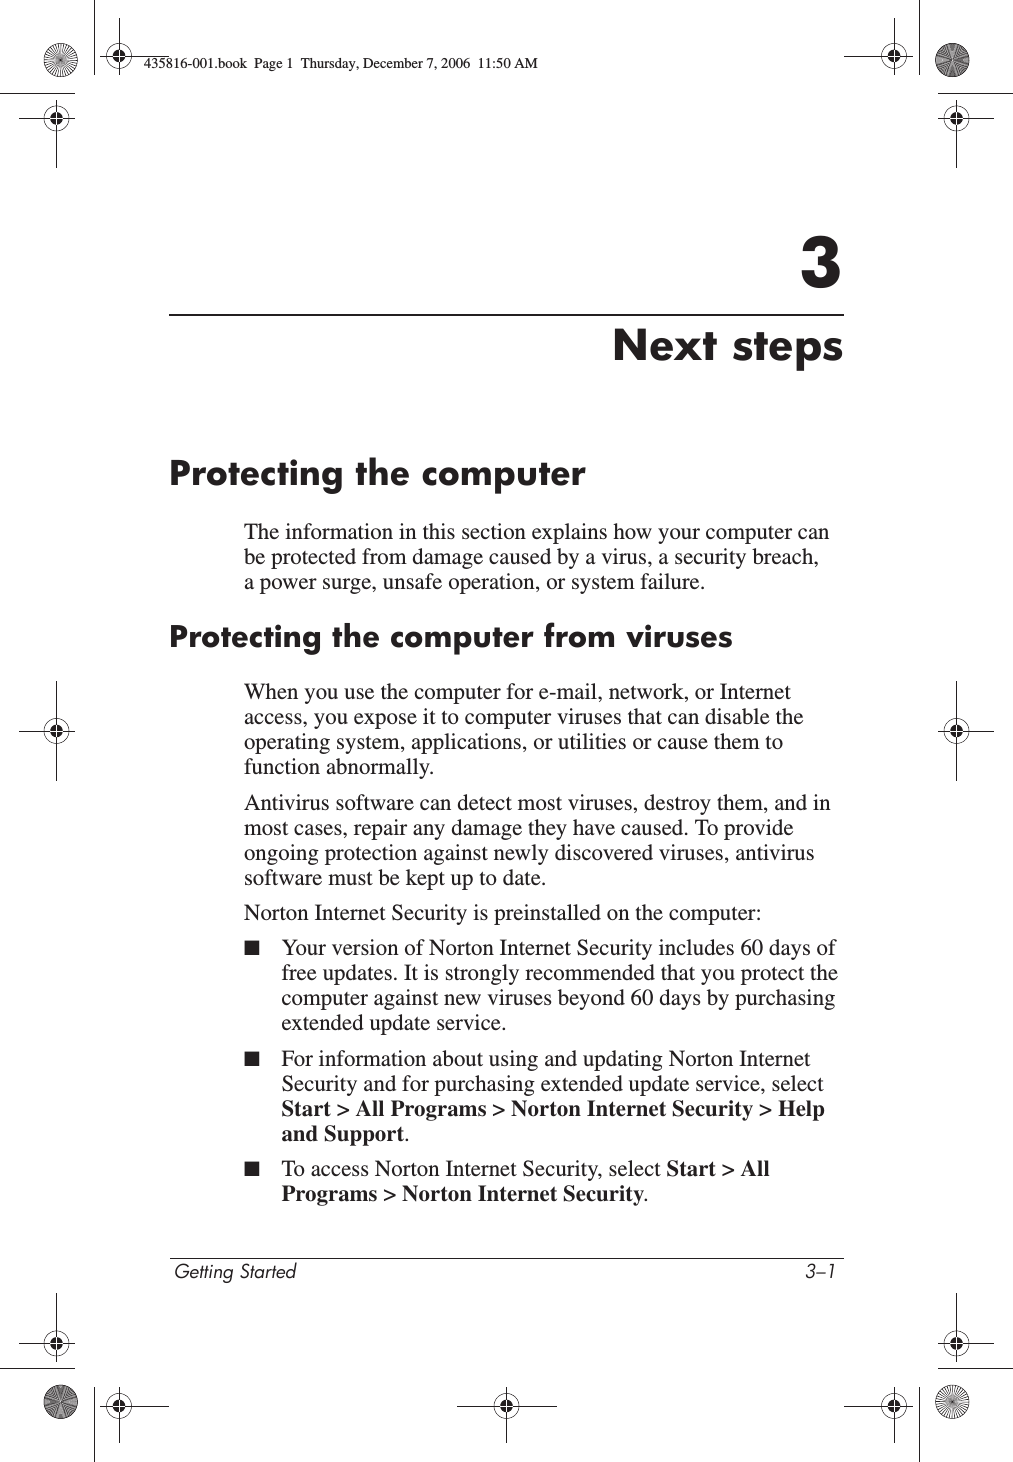 Getting Started 3–13Next stepsProtecting the computerThe information in this section explains how your computer can be protected from damage caused by a virus, a security breach, a power surge, unsafe operation, or system failure.Protecting the computer from virusesWhen you use the computer for e-mail, network, or Internet access, you expose it to computer viruses that can disable the operating system, applications, or utilities or cause them to function abnormally. Antivirus software can detect most viruses, destroy them, and in most cases, repair any damage they have caused. To provide ongoing protection against newly discovered viruses, antivirus software must be kept up to date.Norton Internet Security is preinstalled on the computer:■Your version of Norton Internet Security includes 60 days of free updates. It is strongly recommended that you protect the computer against new viruses beyond 60 days by purchasing extended update service.■For information about using and updating Norton Internet Security and for purchasing extended update service, select Start &gt; All Programs &gt; Norton Internet Security &gt; Help and Support.■To access Norton Internet Security, select Start &gt; All Programs &gt; Norton Internet Security.435816-001.book  Page 1  Thursday, December 7, 2006  11:50 AM